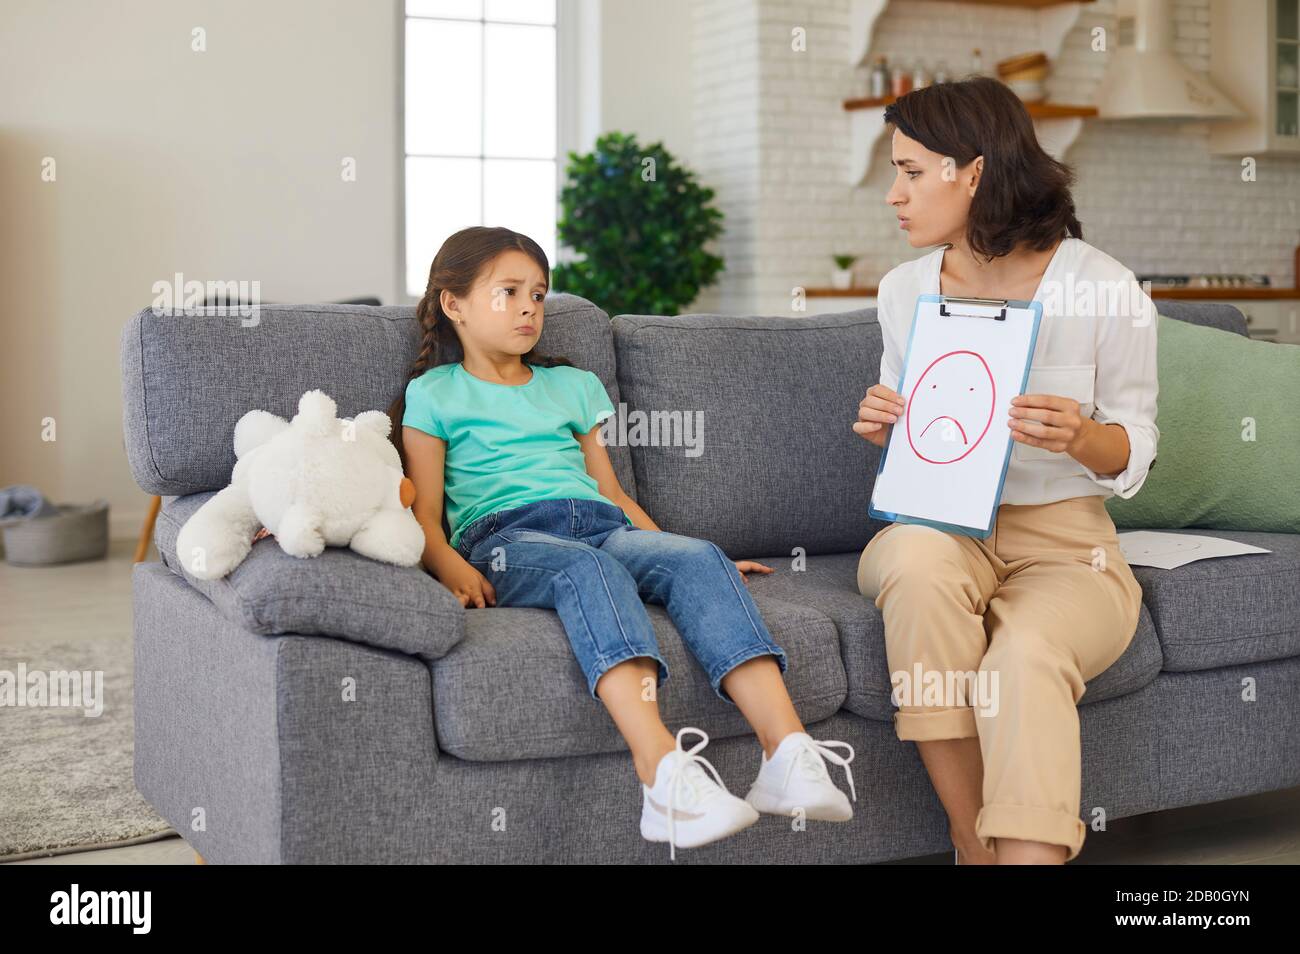 Child psychologist having therapy session with little girl discussing and portraying emotions Stock Photo